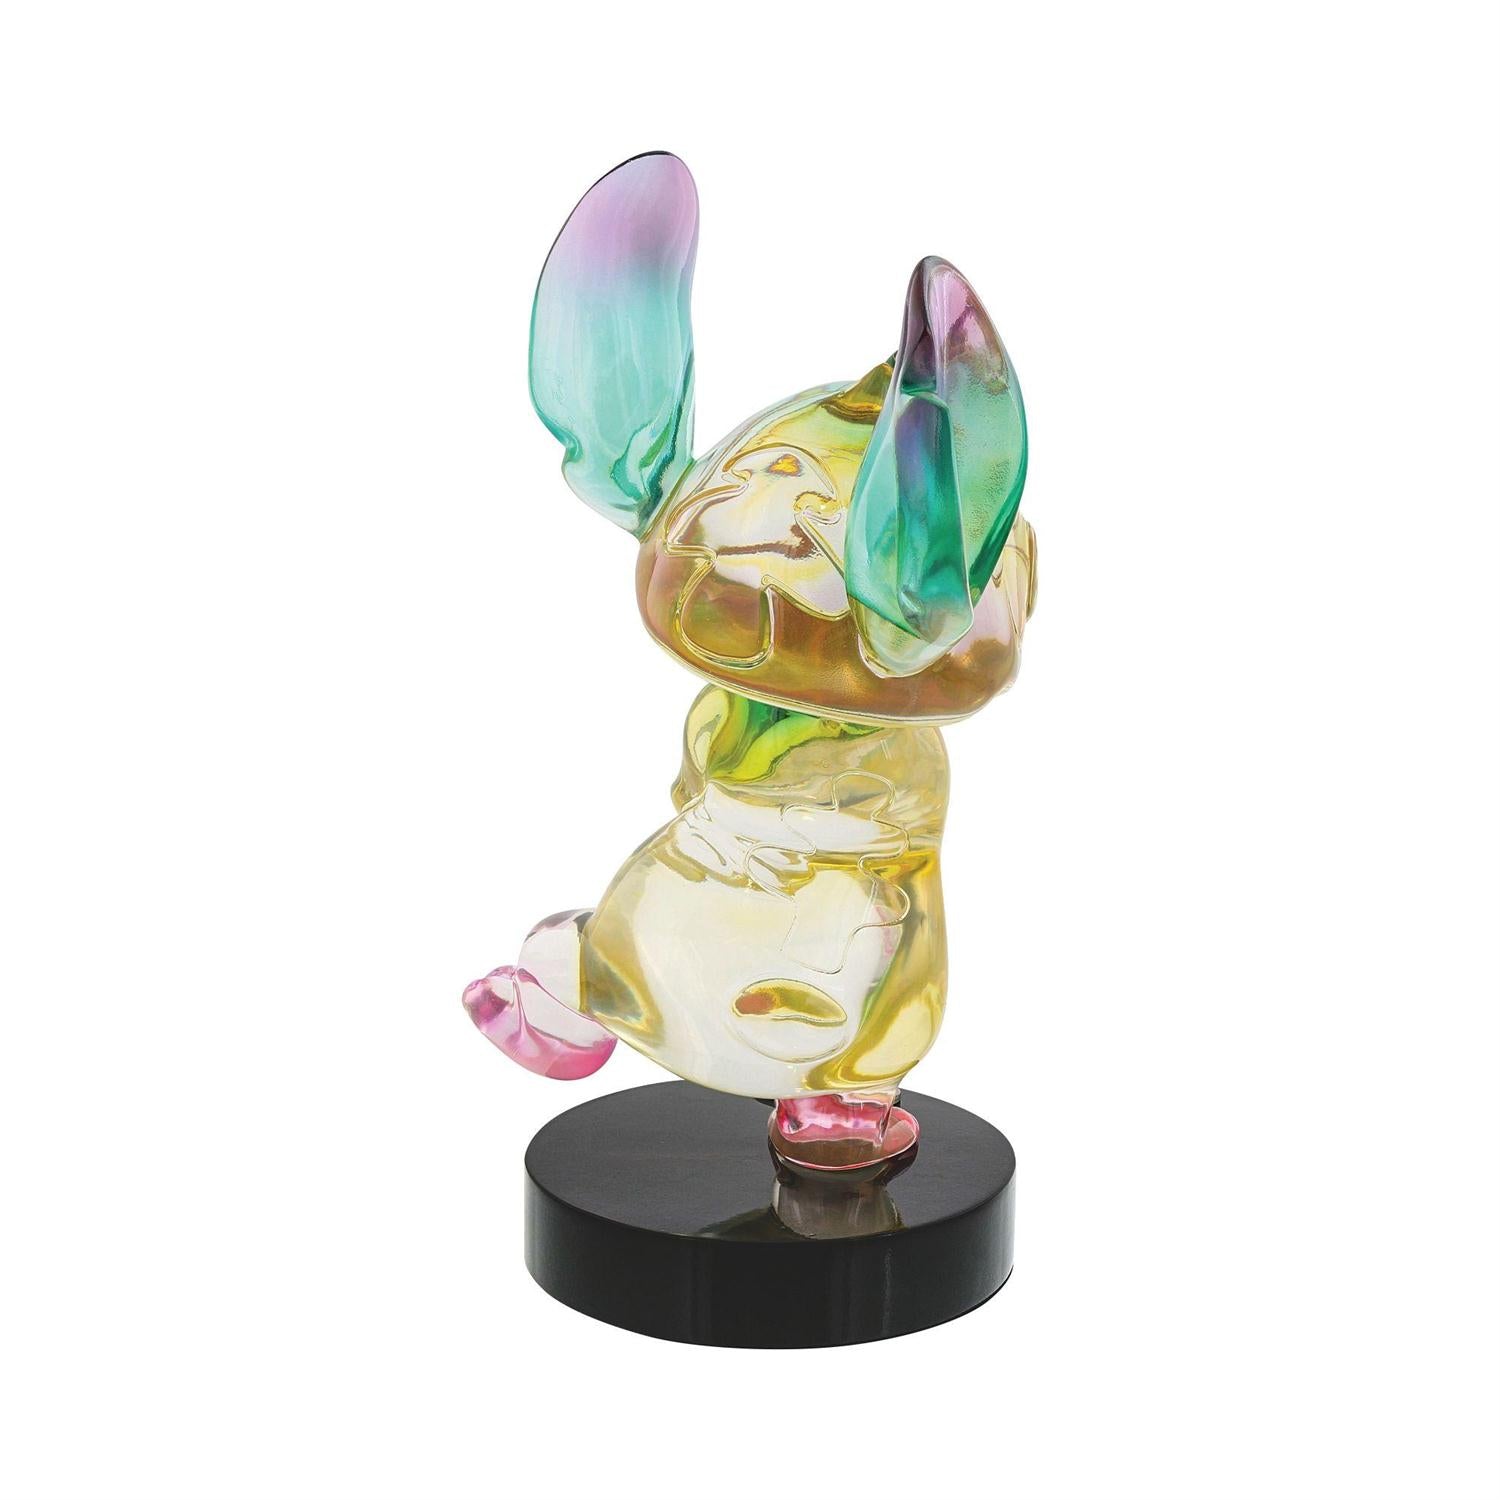 Stitch- clear resin with a rainbow color tint - back